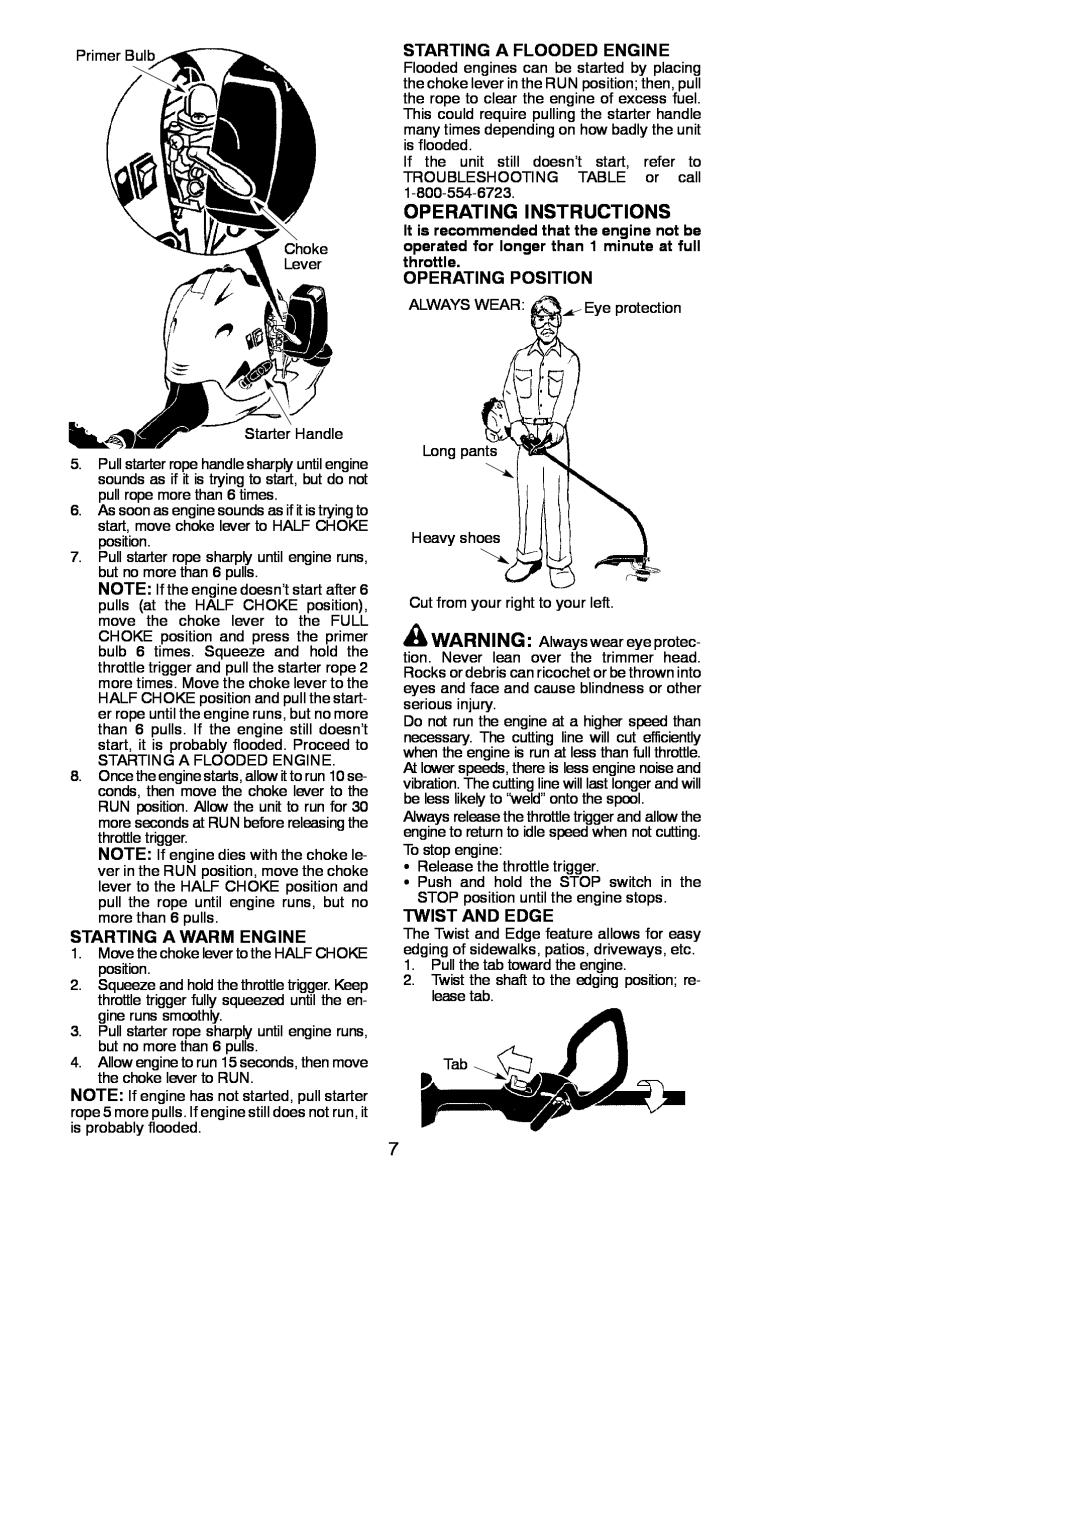 Poulan 952711932 Operating Instructions, Starting A Warm Engine, Starting A Flooded Engine, Operating Position 